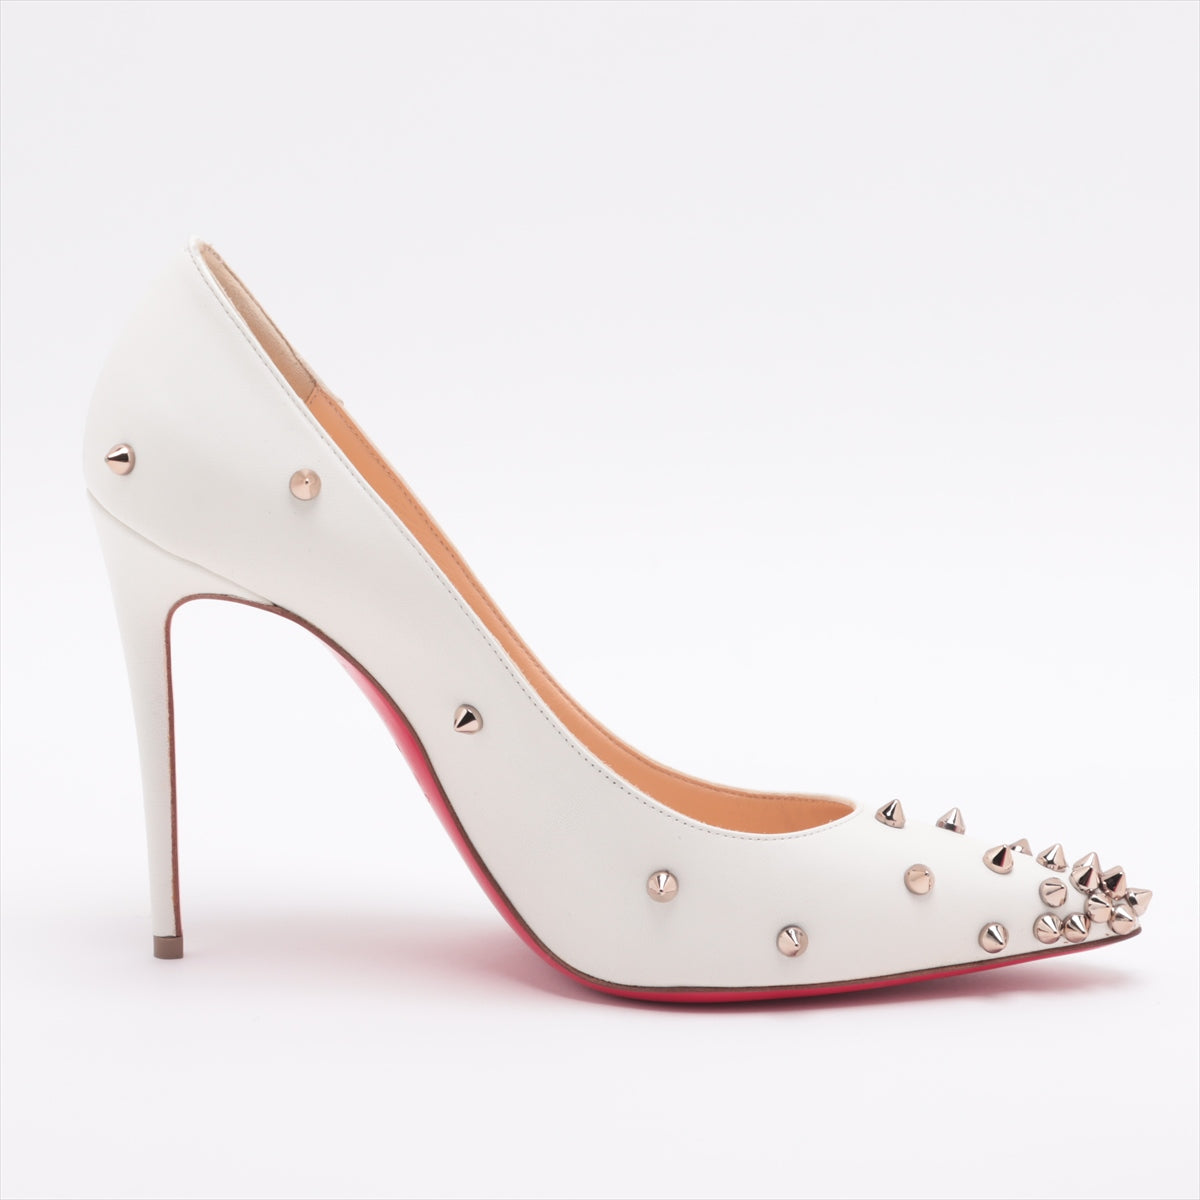 Christian Louboutin Leather Pumps 36 1/2 Ladies' White Spike Studs